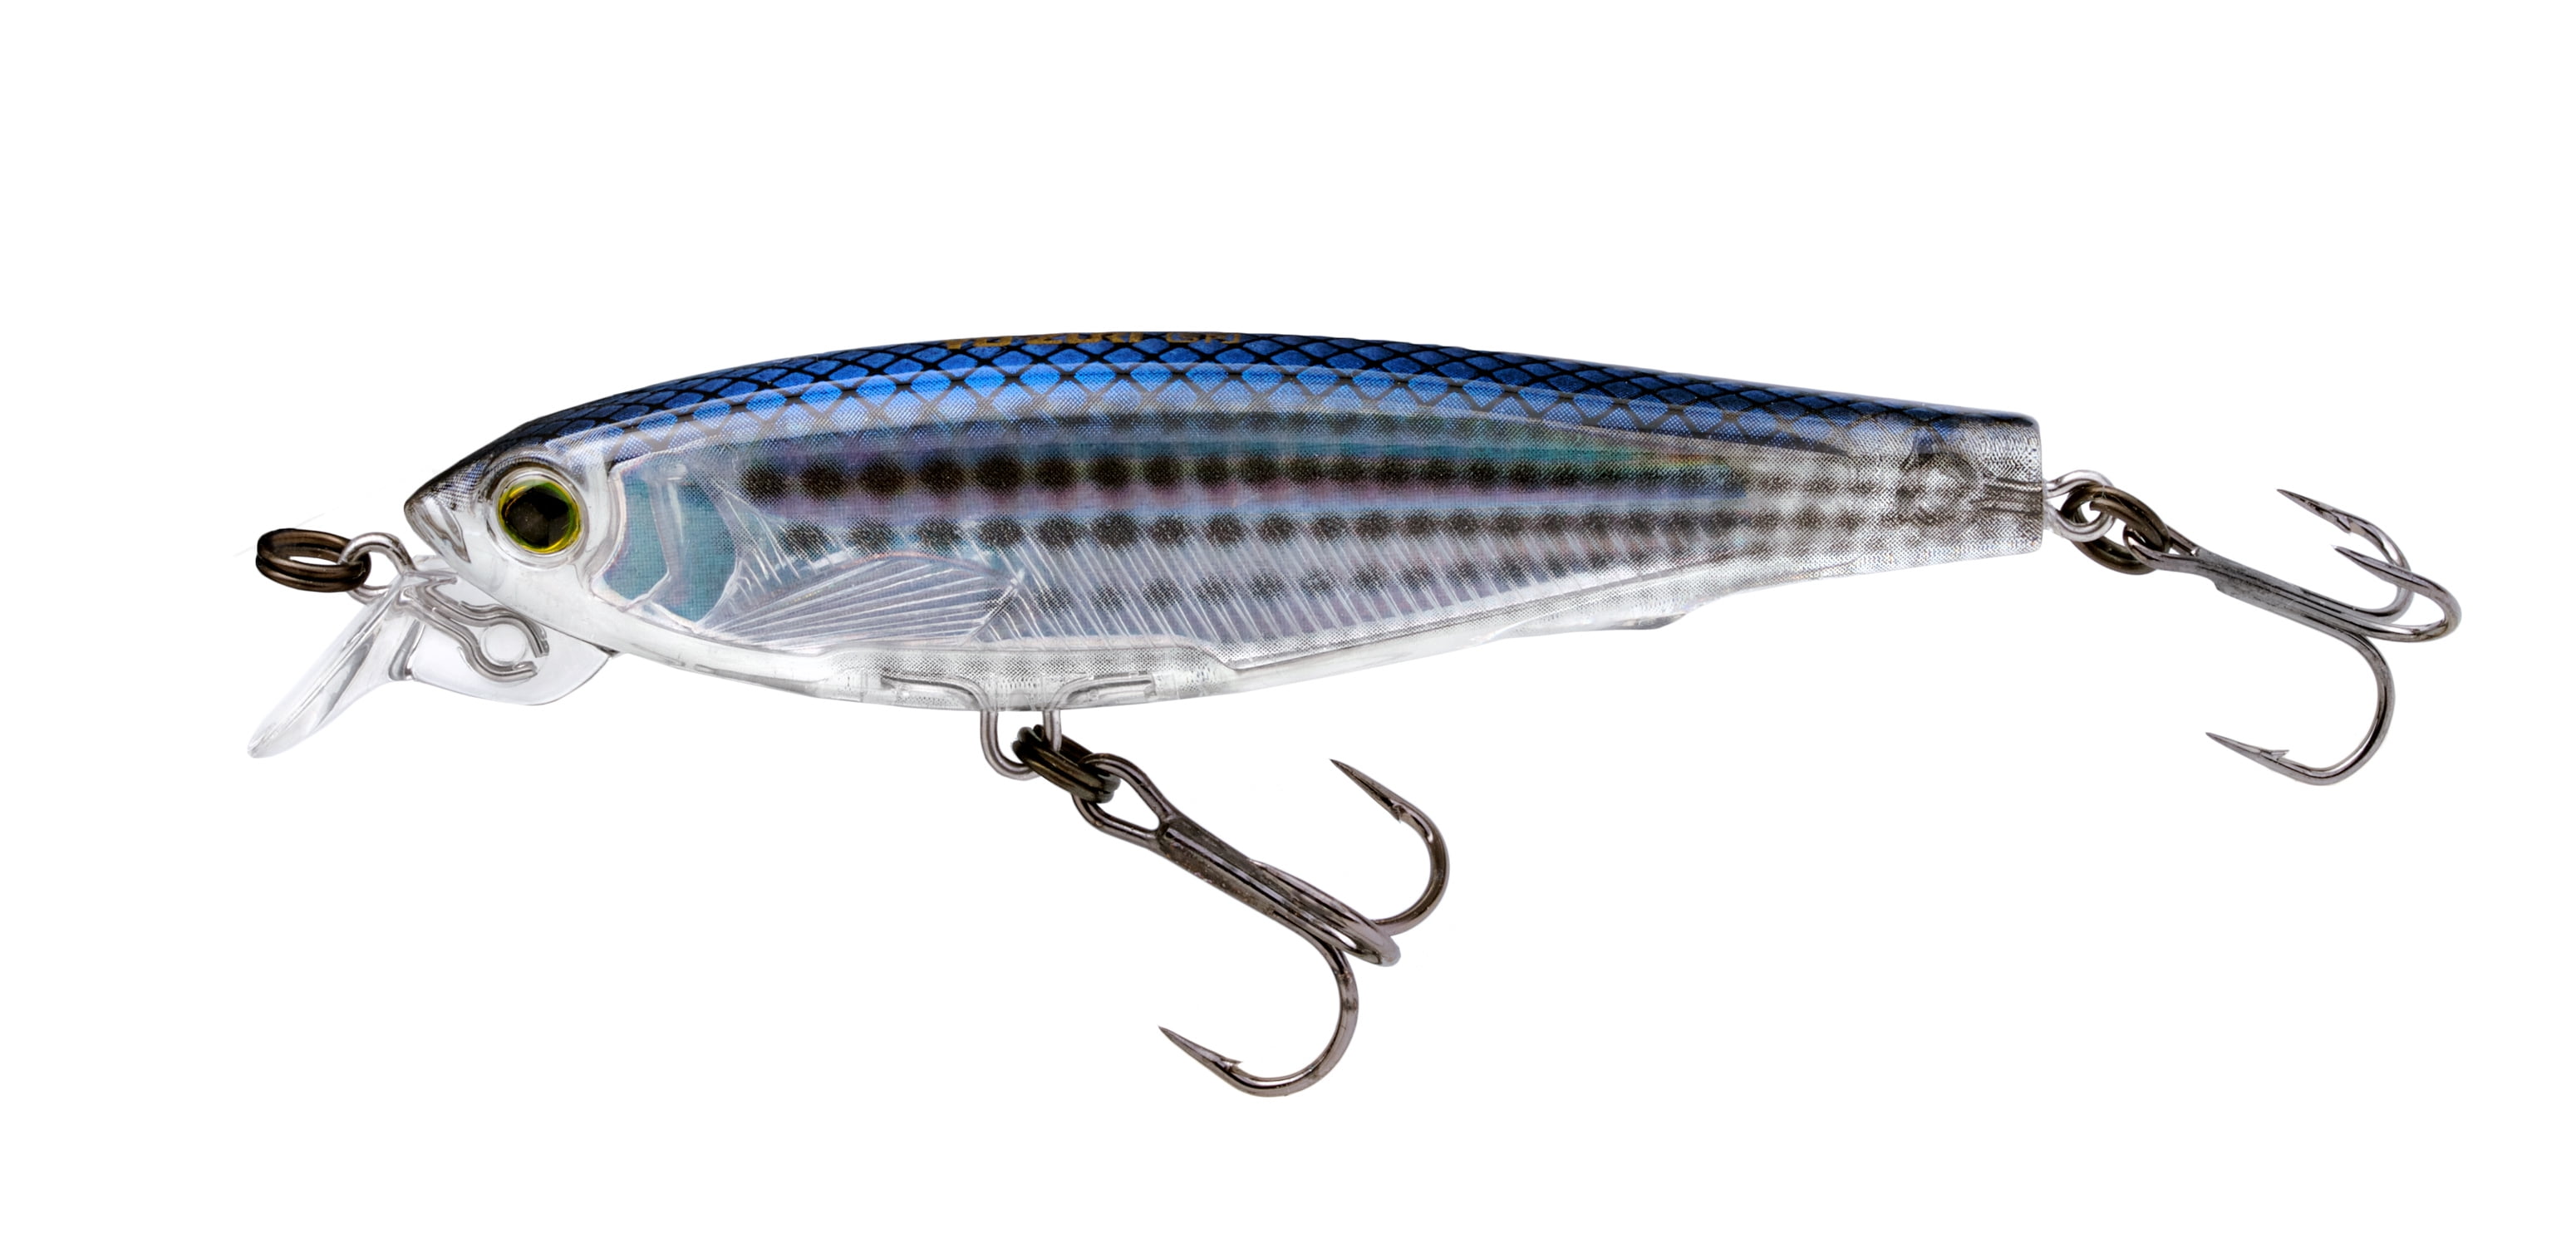 Details about   Jerkbait Bait Fishing Lure 3 1/4 inch 1/4 oz Tight Wobble Slow Floating M638 